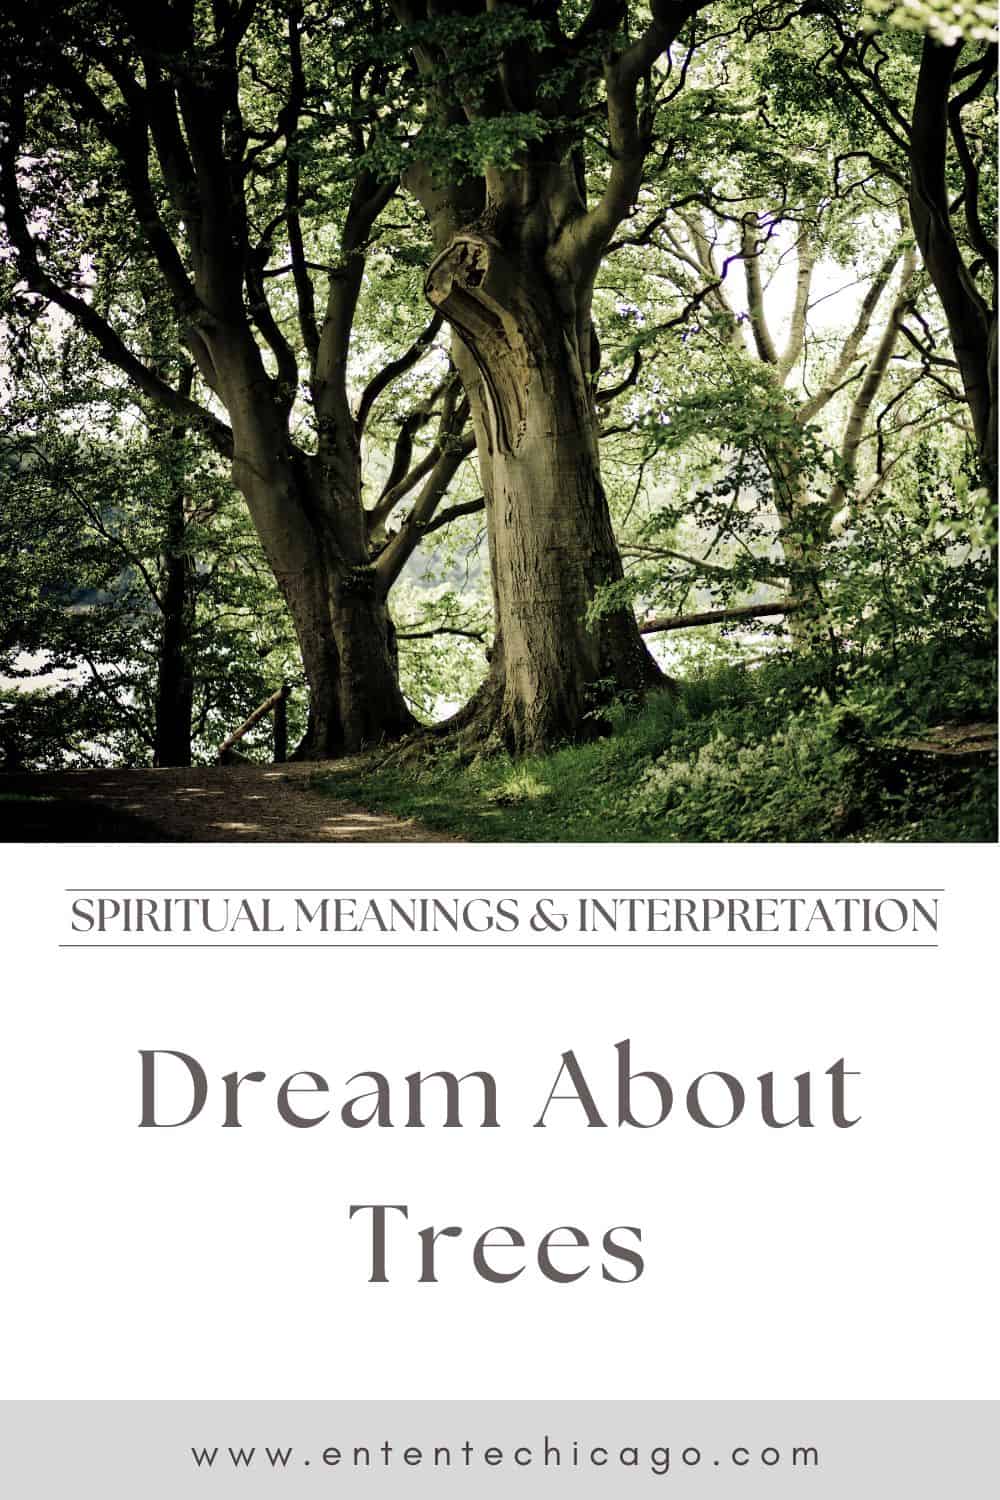 What Does It Mean When You Dream About Trees?